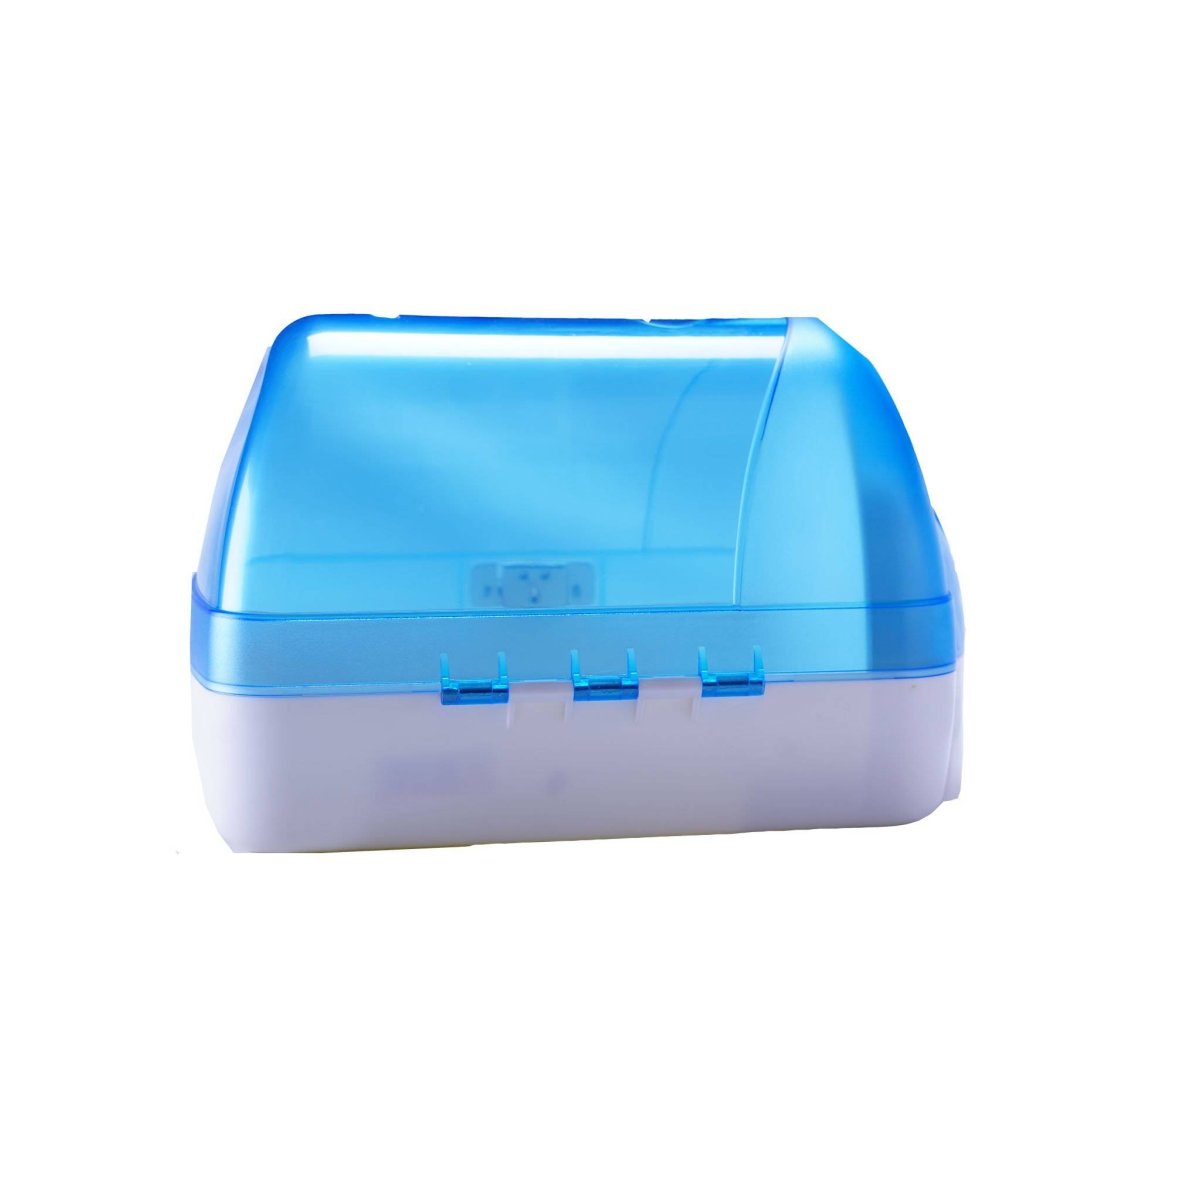 Maxi Roll Dispenser with Tight Hole 1 Piece - hotpackwebstore.com - Dispensers